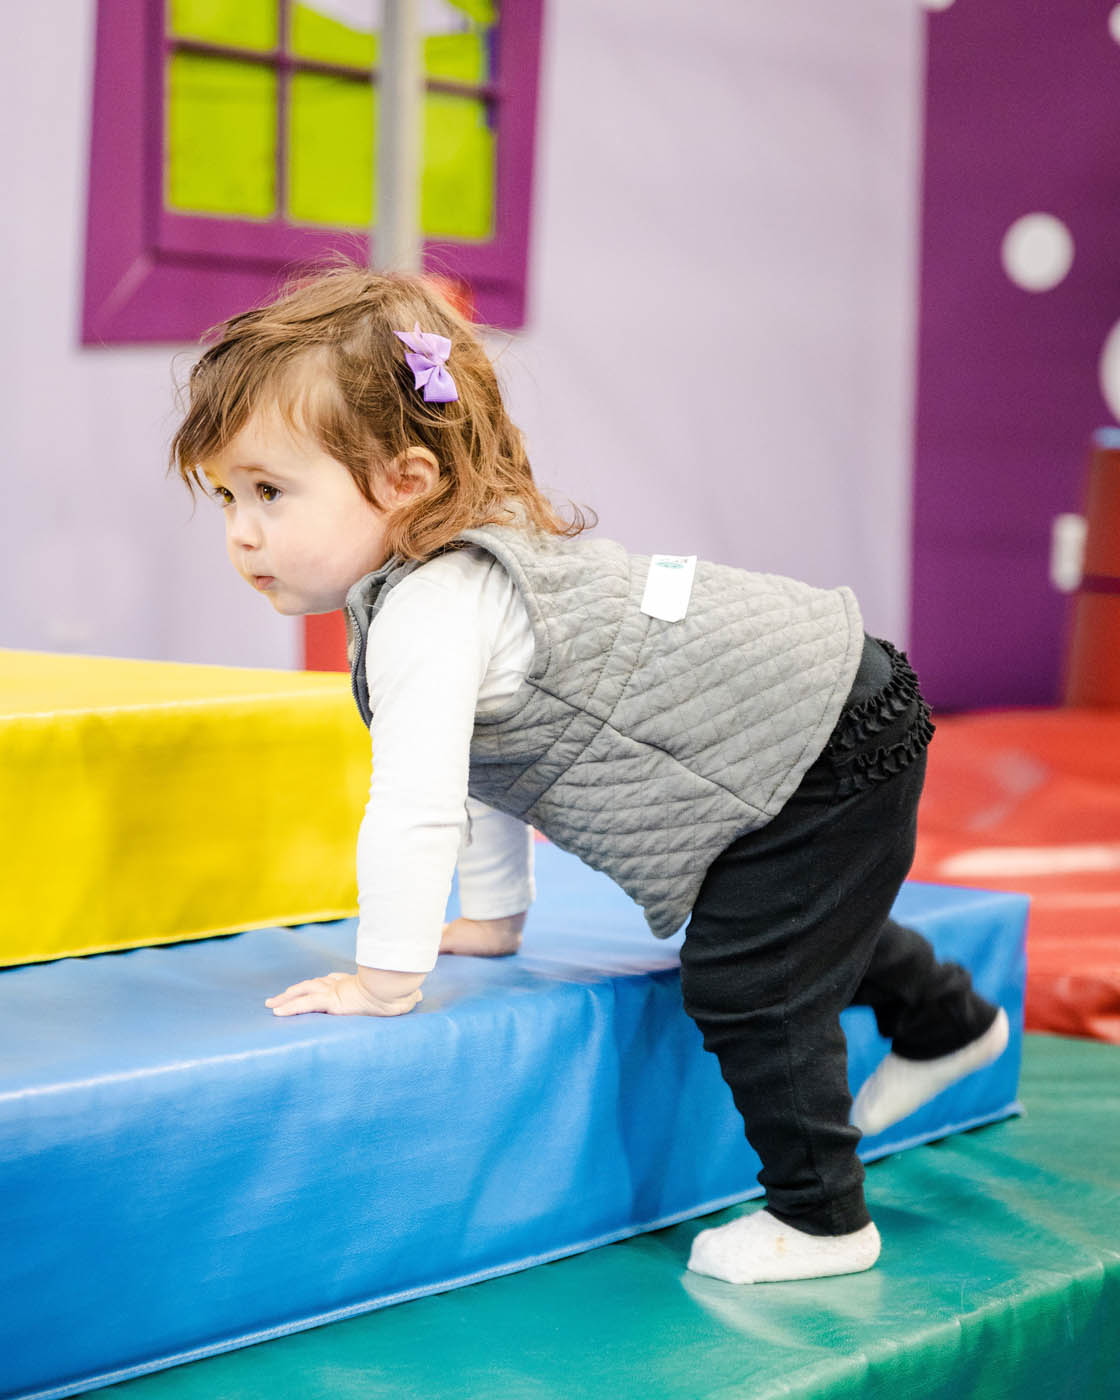 A little girl climbing on soft tumbling equipment for toddlers at Romp n' Roll in Midlothian, VA.